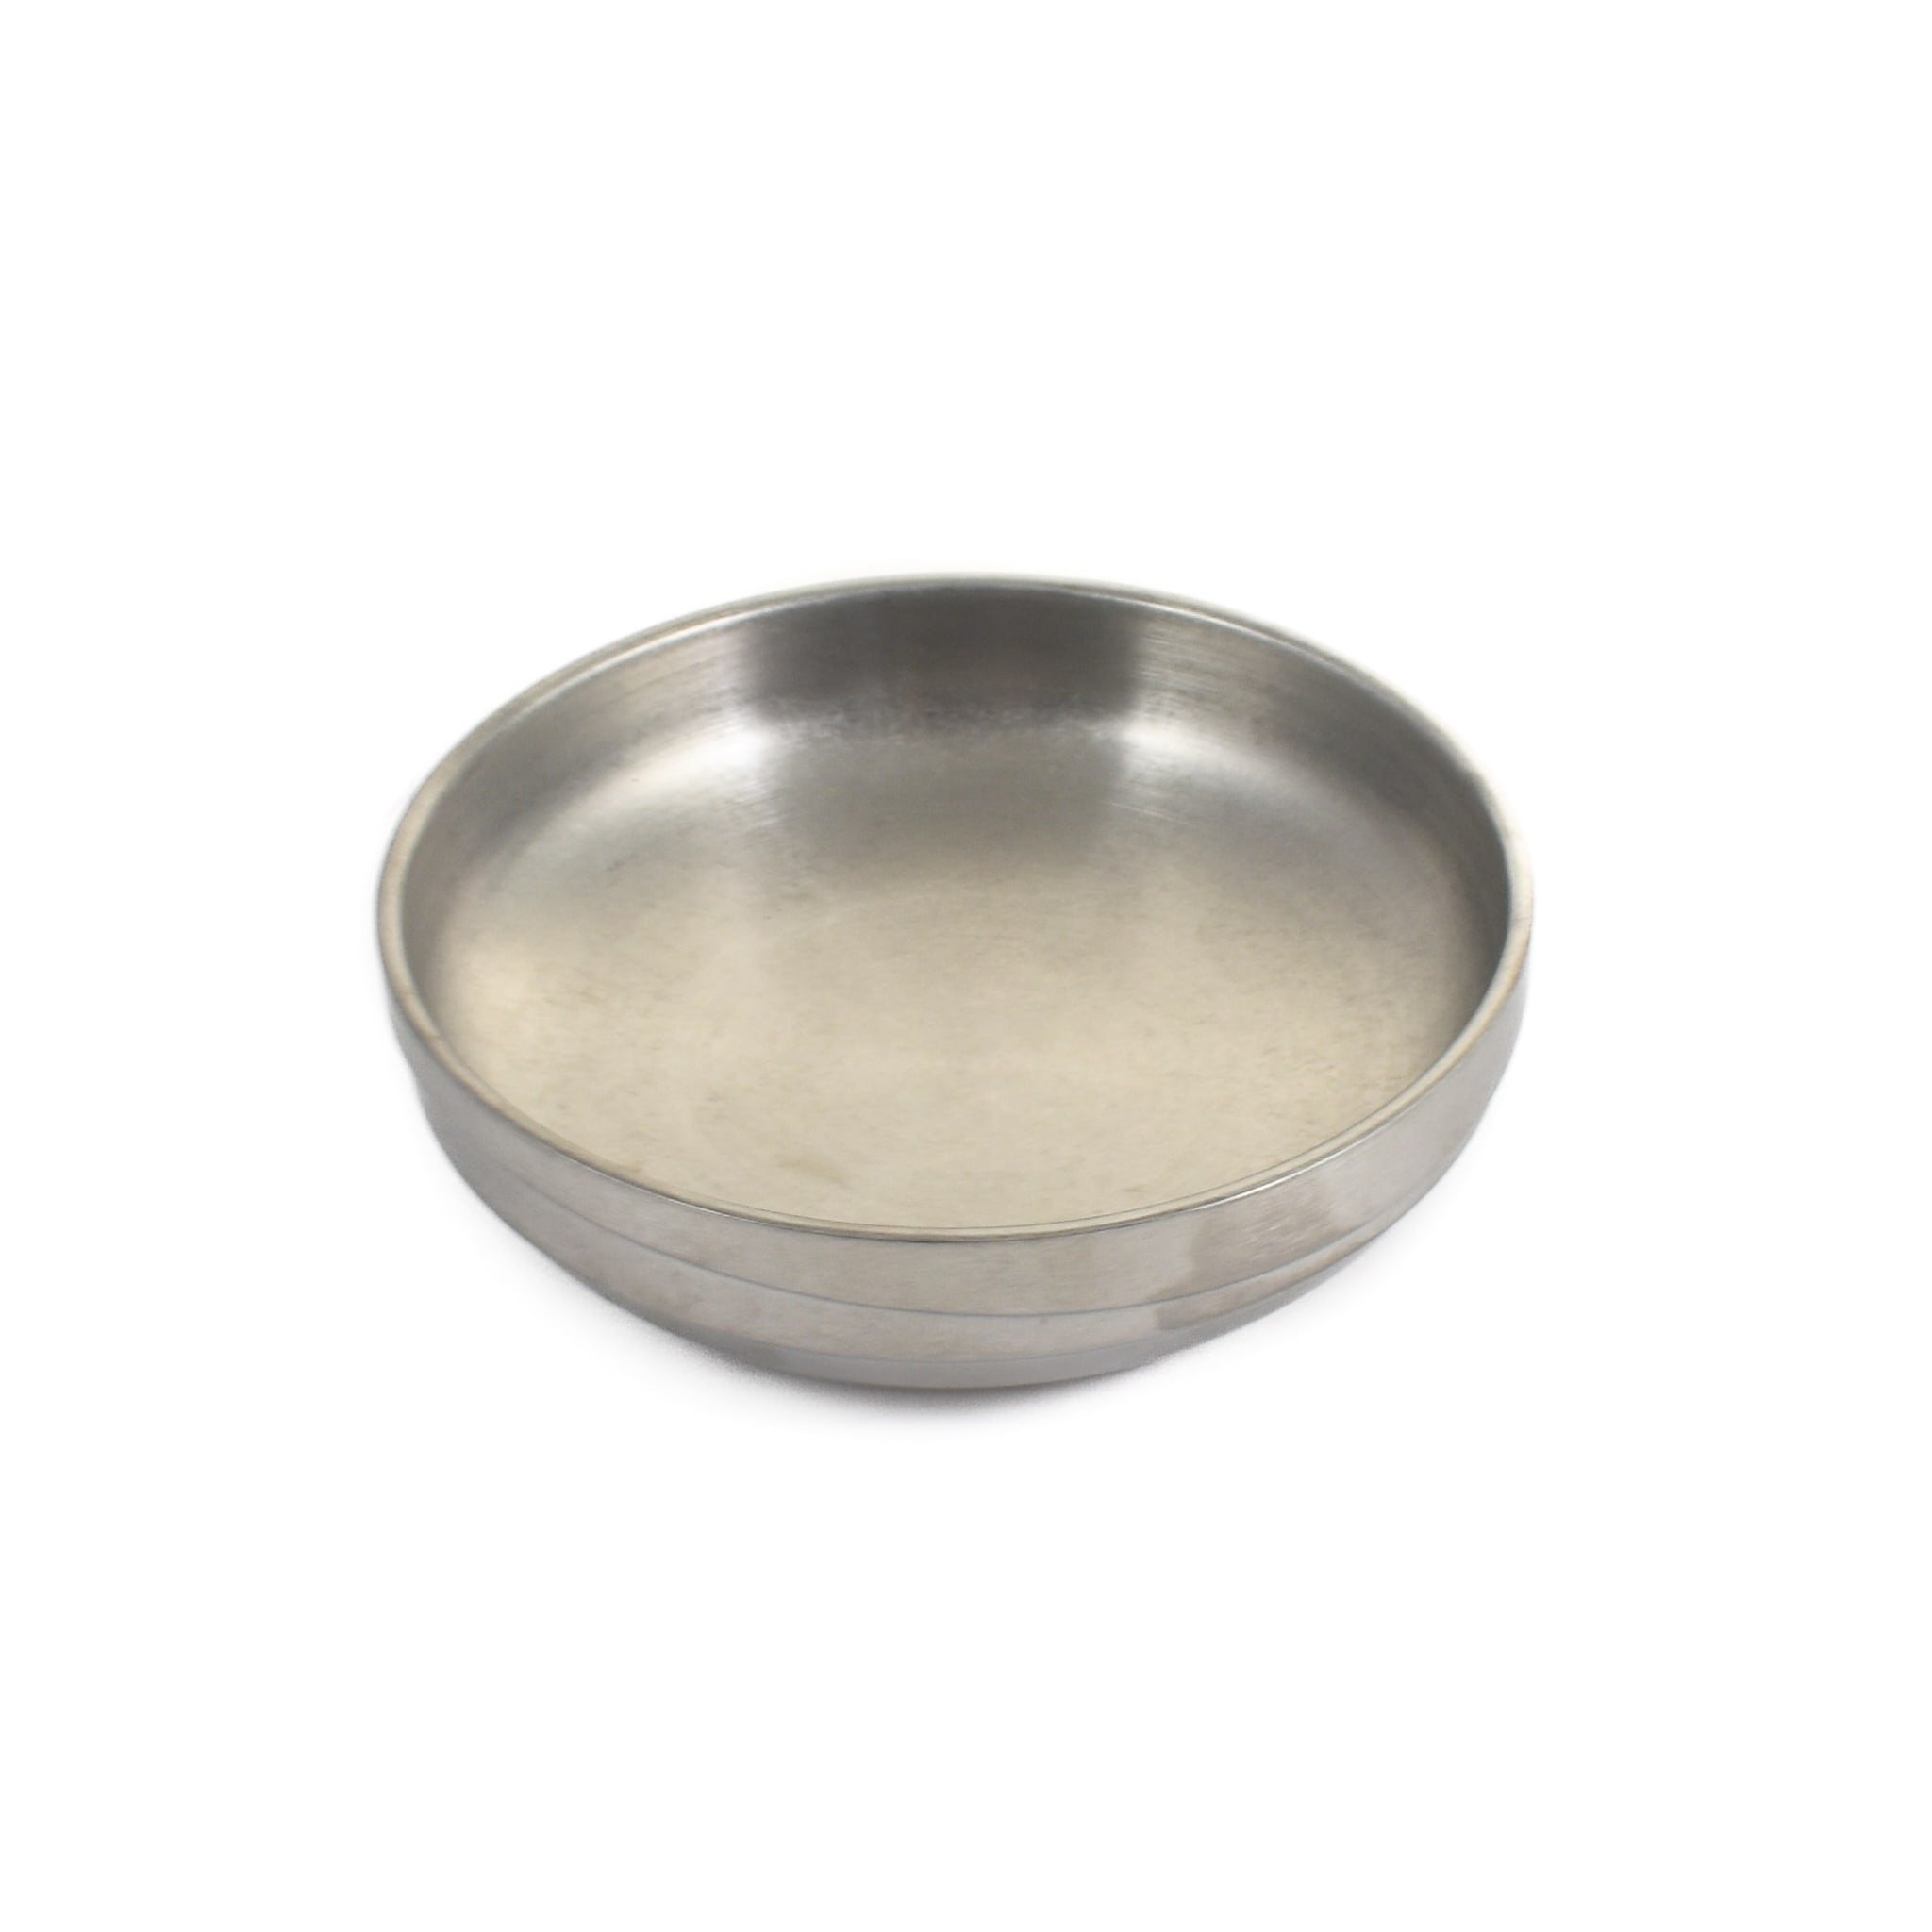 Vintage Style Stainless Steel Bowl, 15cm